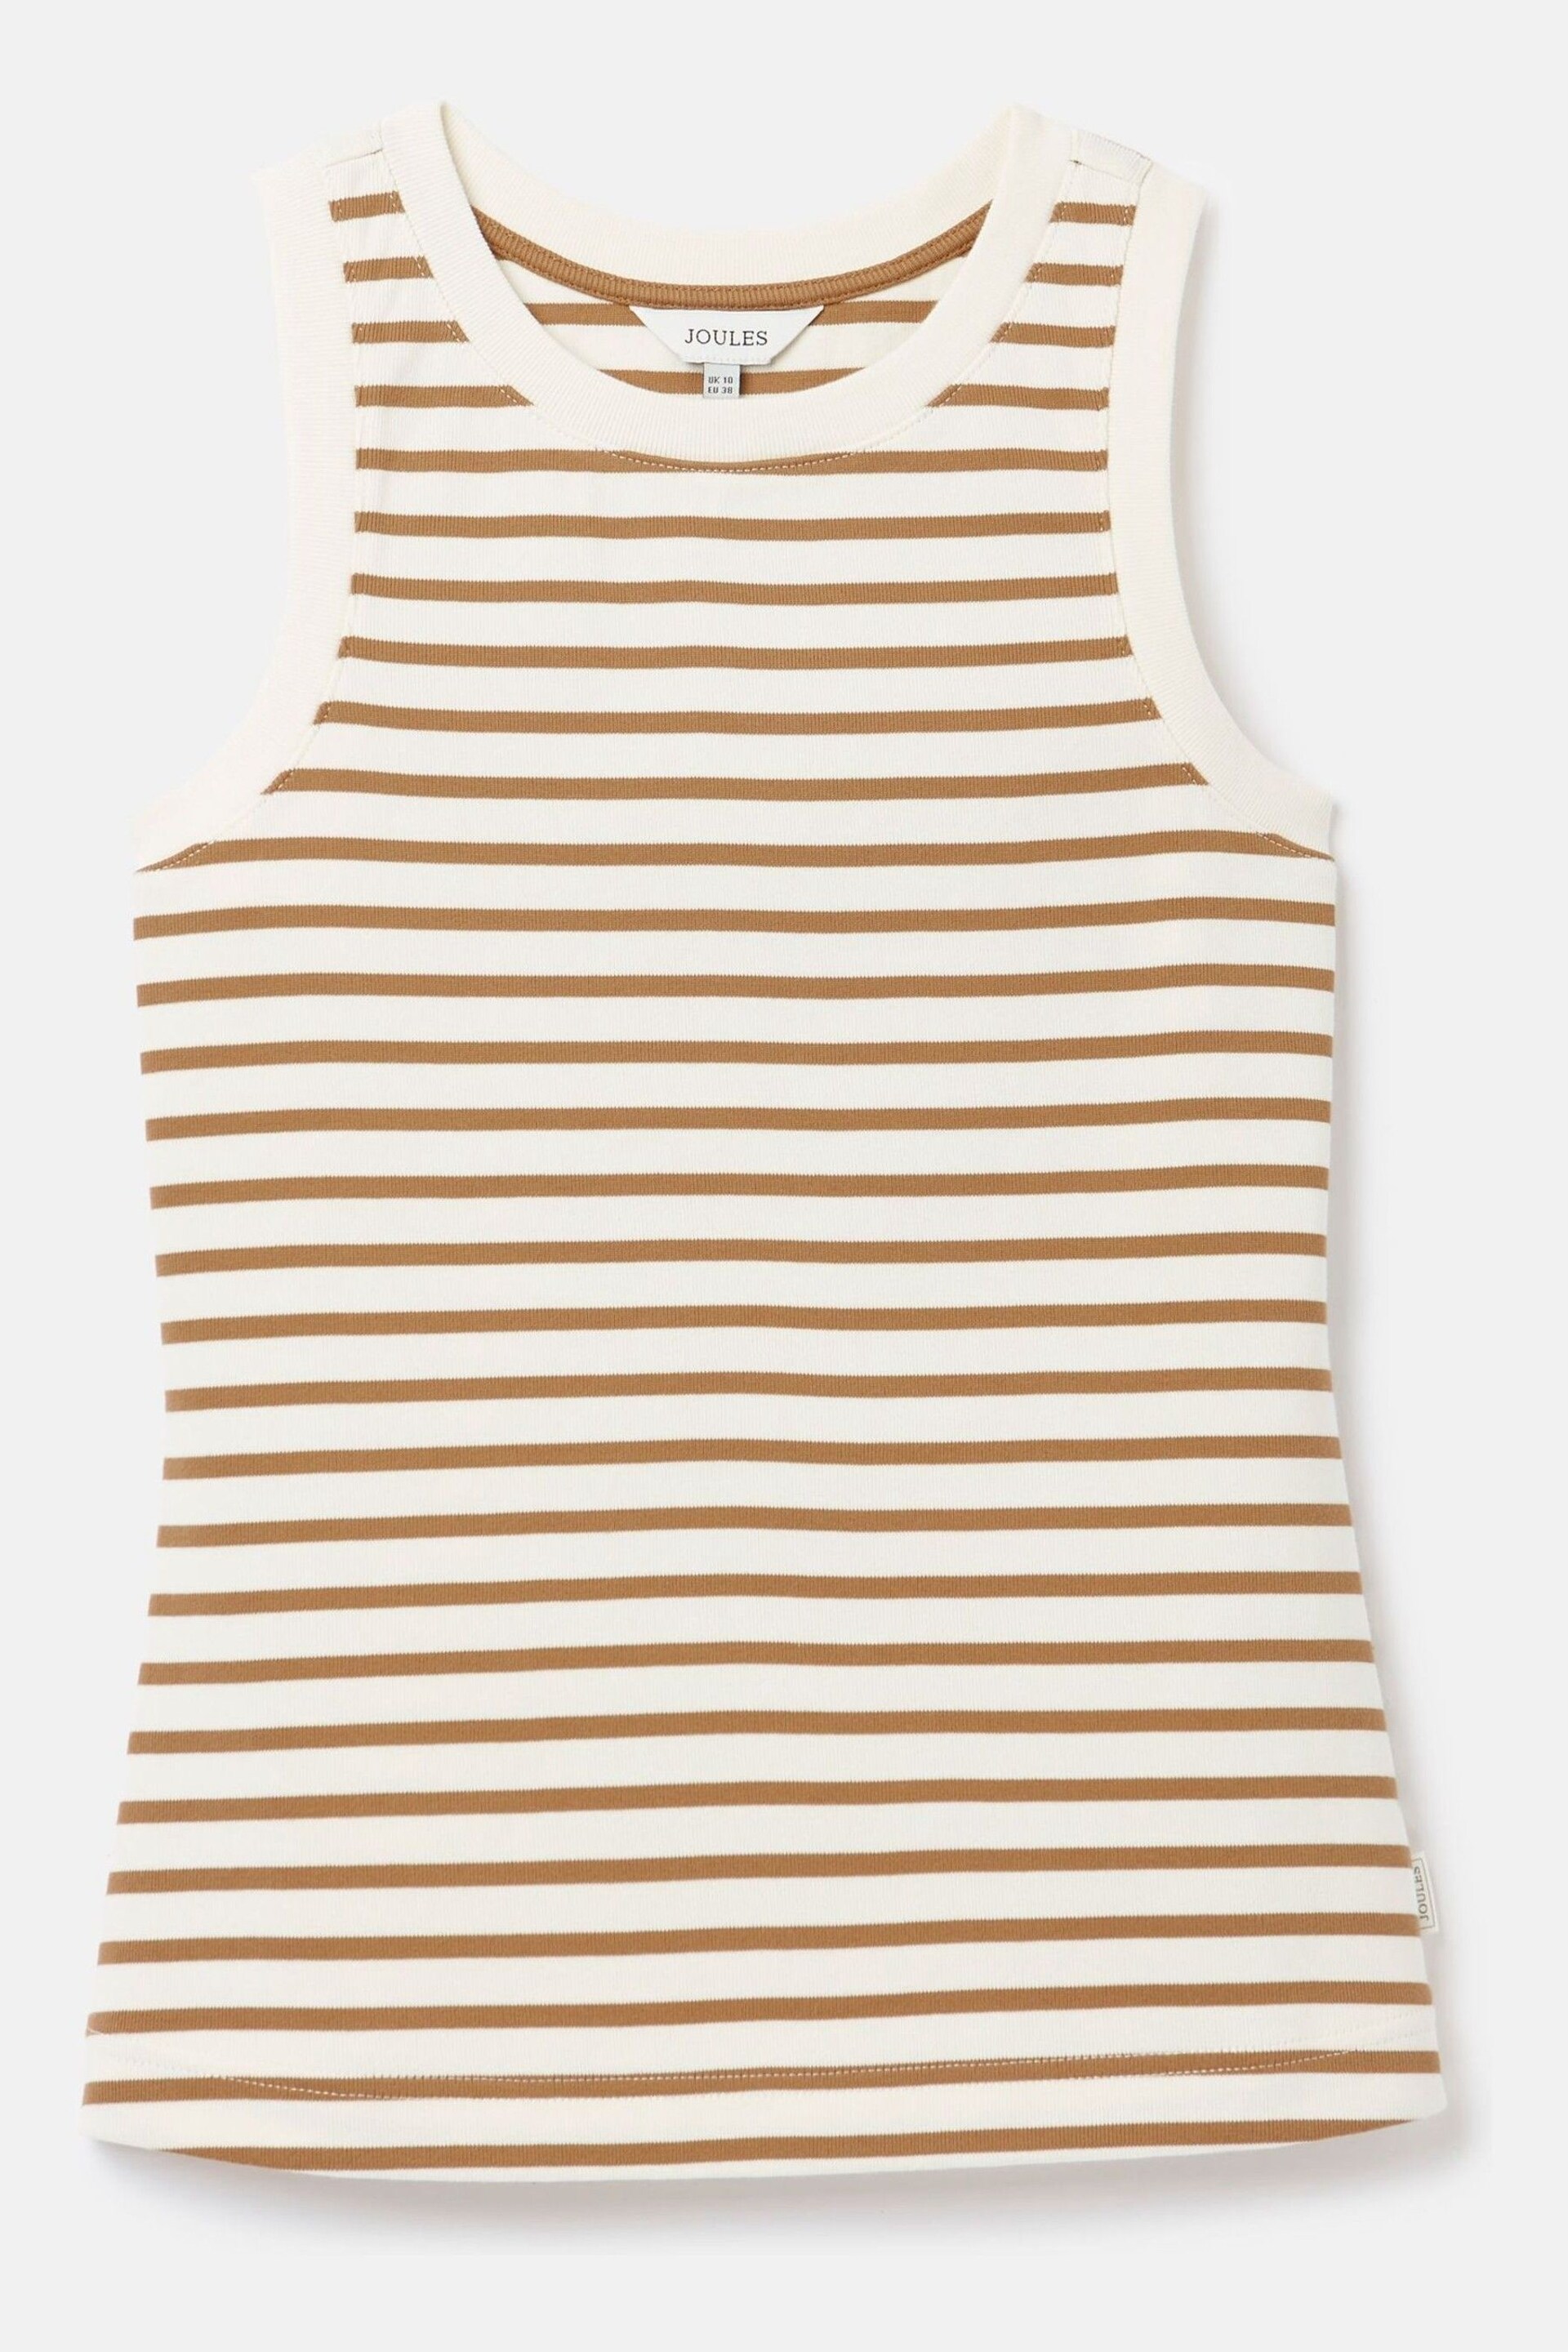 Joules Harbour Cream & Tan Striped Jersey Vest - Image 7 of 7